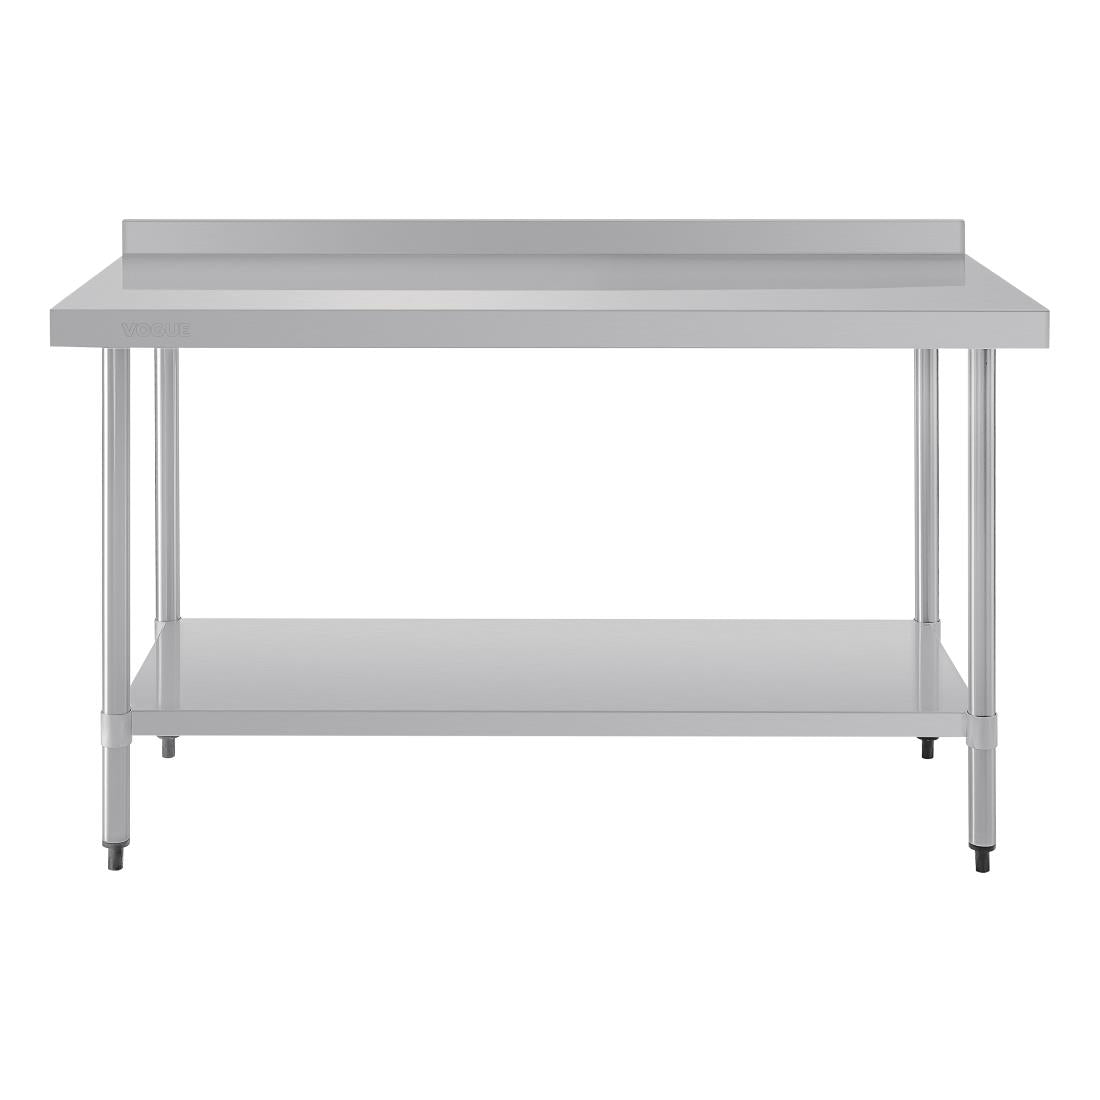 Vogue Stainless Steel Prep Table with Upstand 1500mm